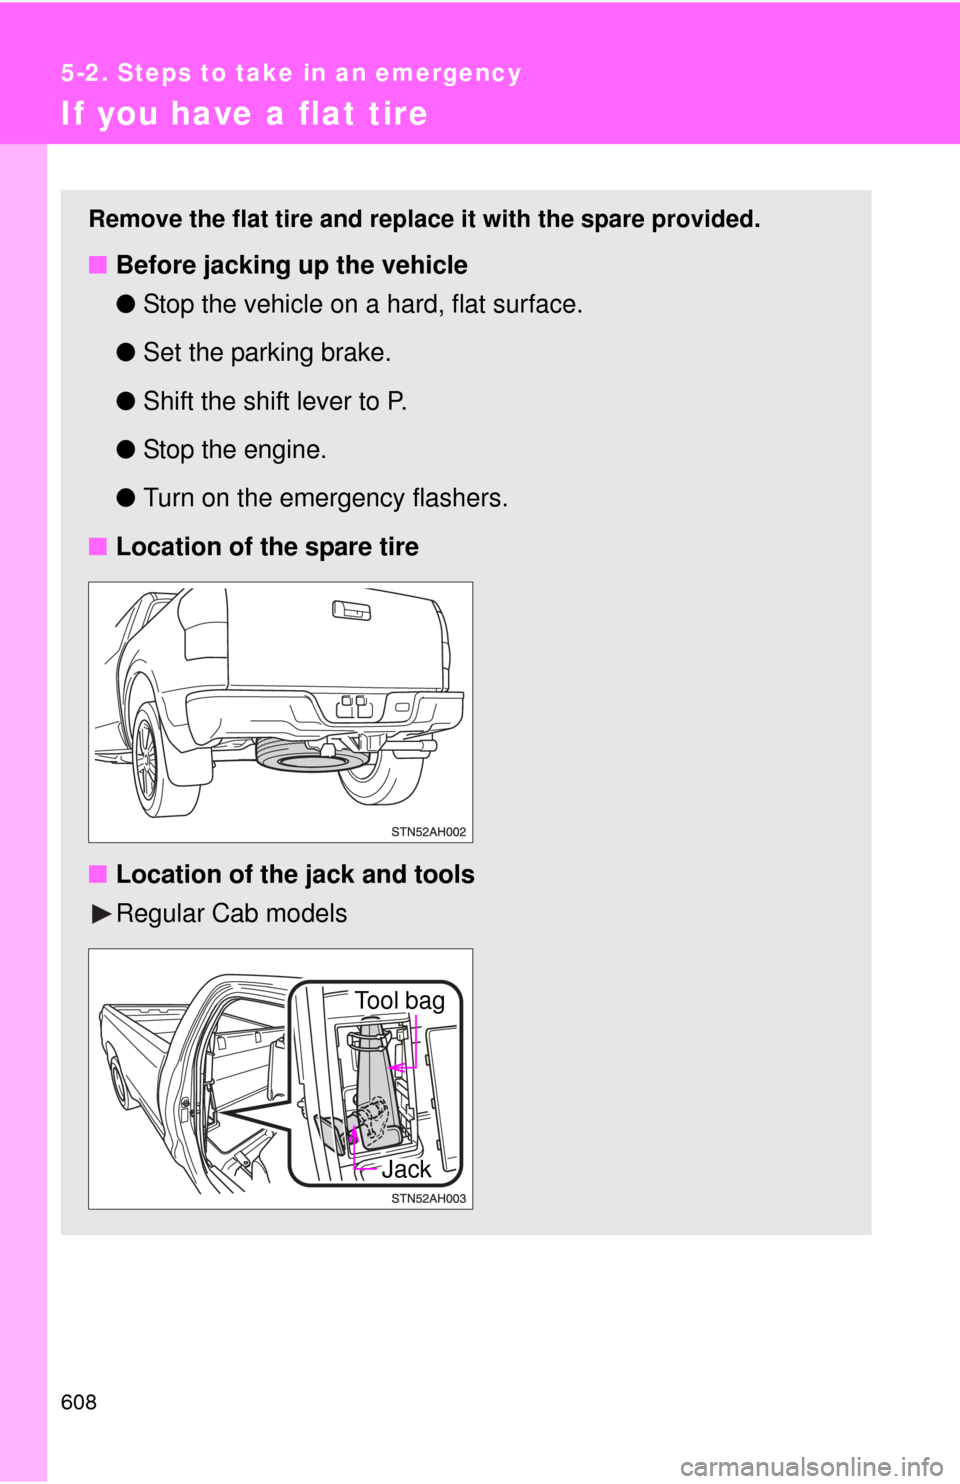 TOYOTA TUNDRA 2010 2.G Owners Manual 608
5-2. Steps to take in an emergency
If you have a flat tire
Remove the flat tire and replace it with the spare provided.
■Before jacking up the vehicle
●Stop the vehicle on a hard, flat surface